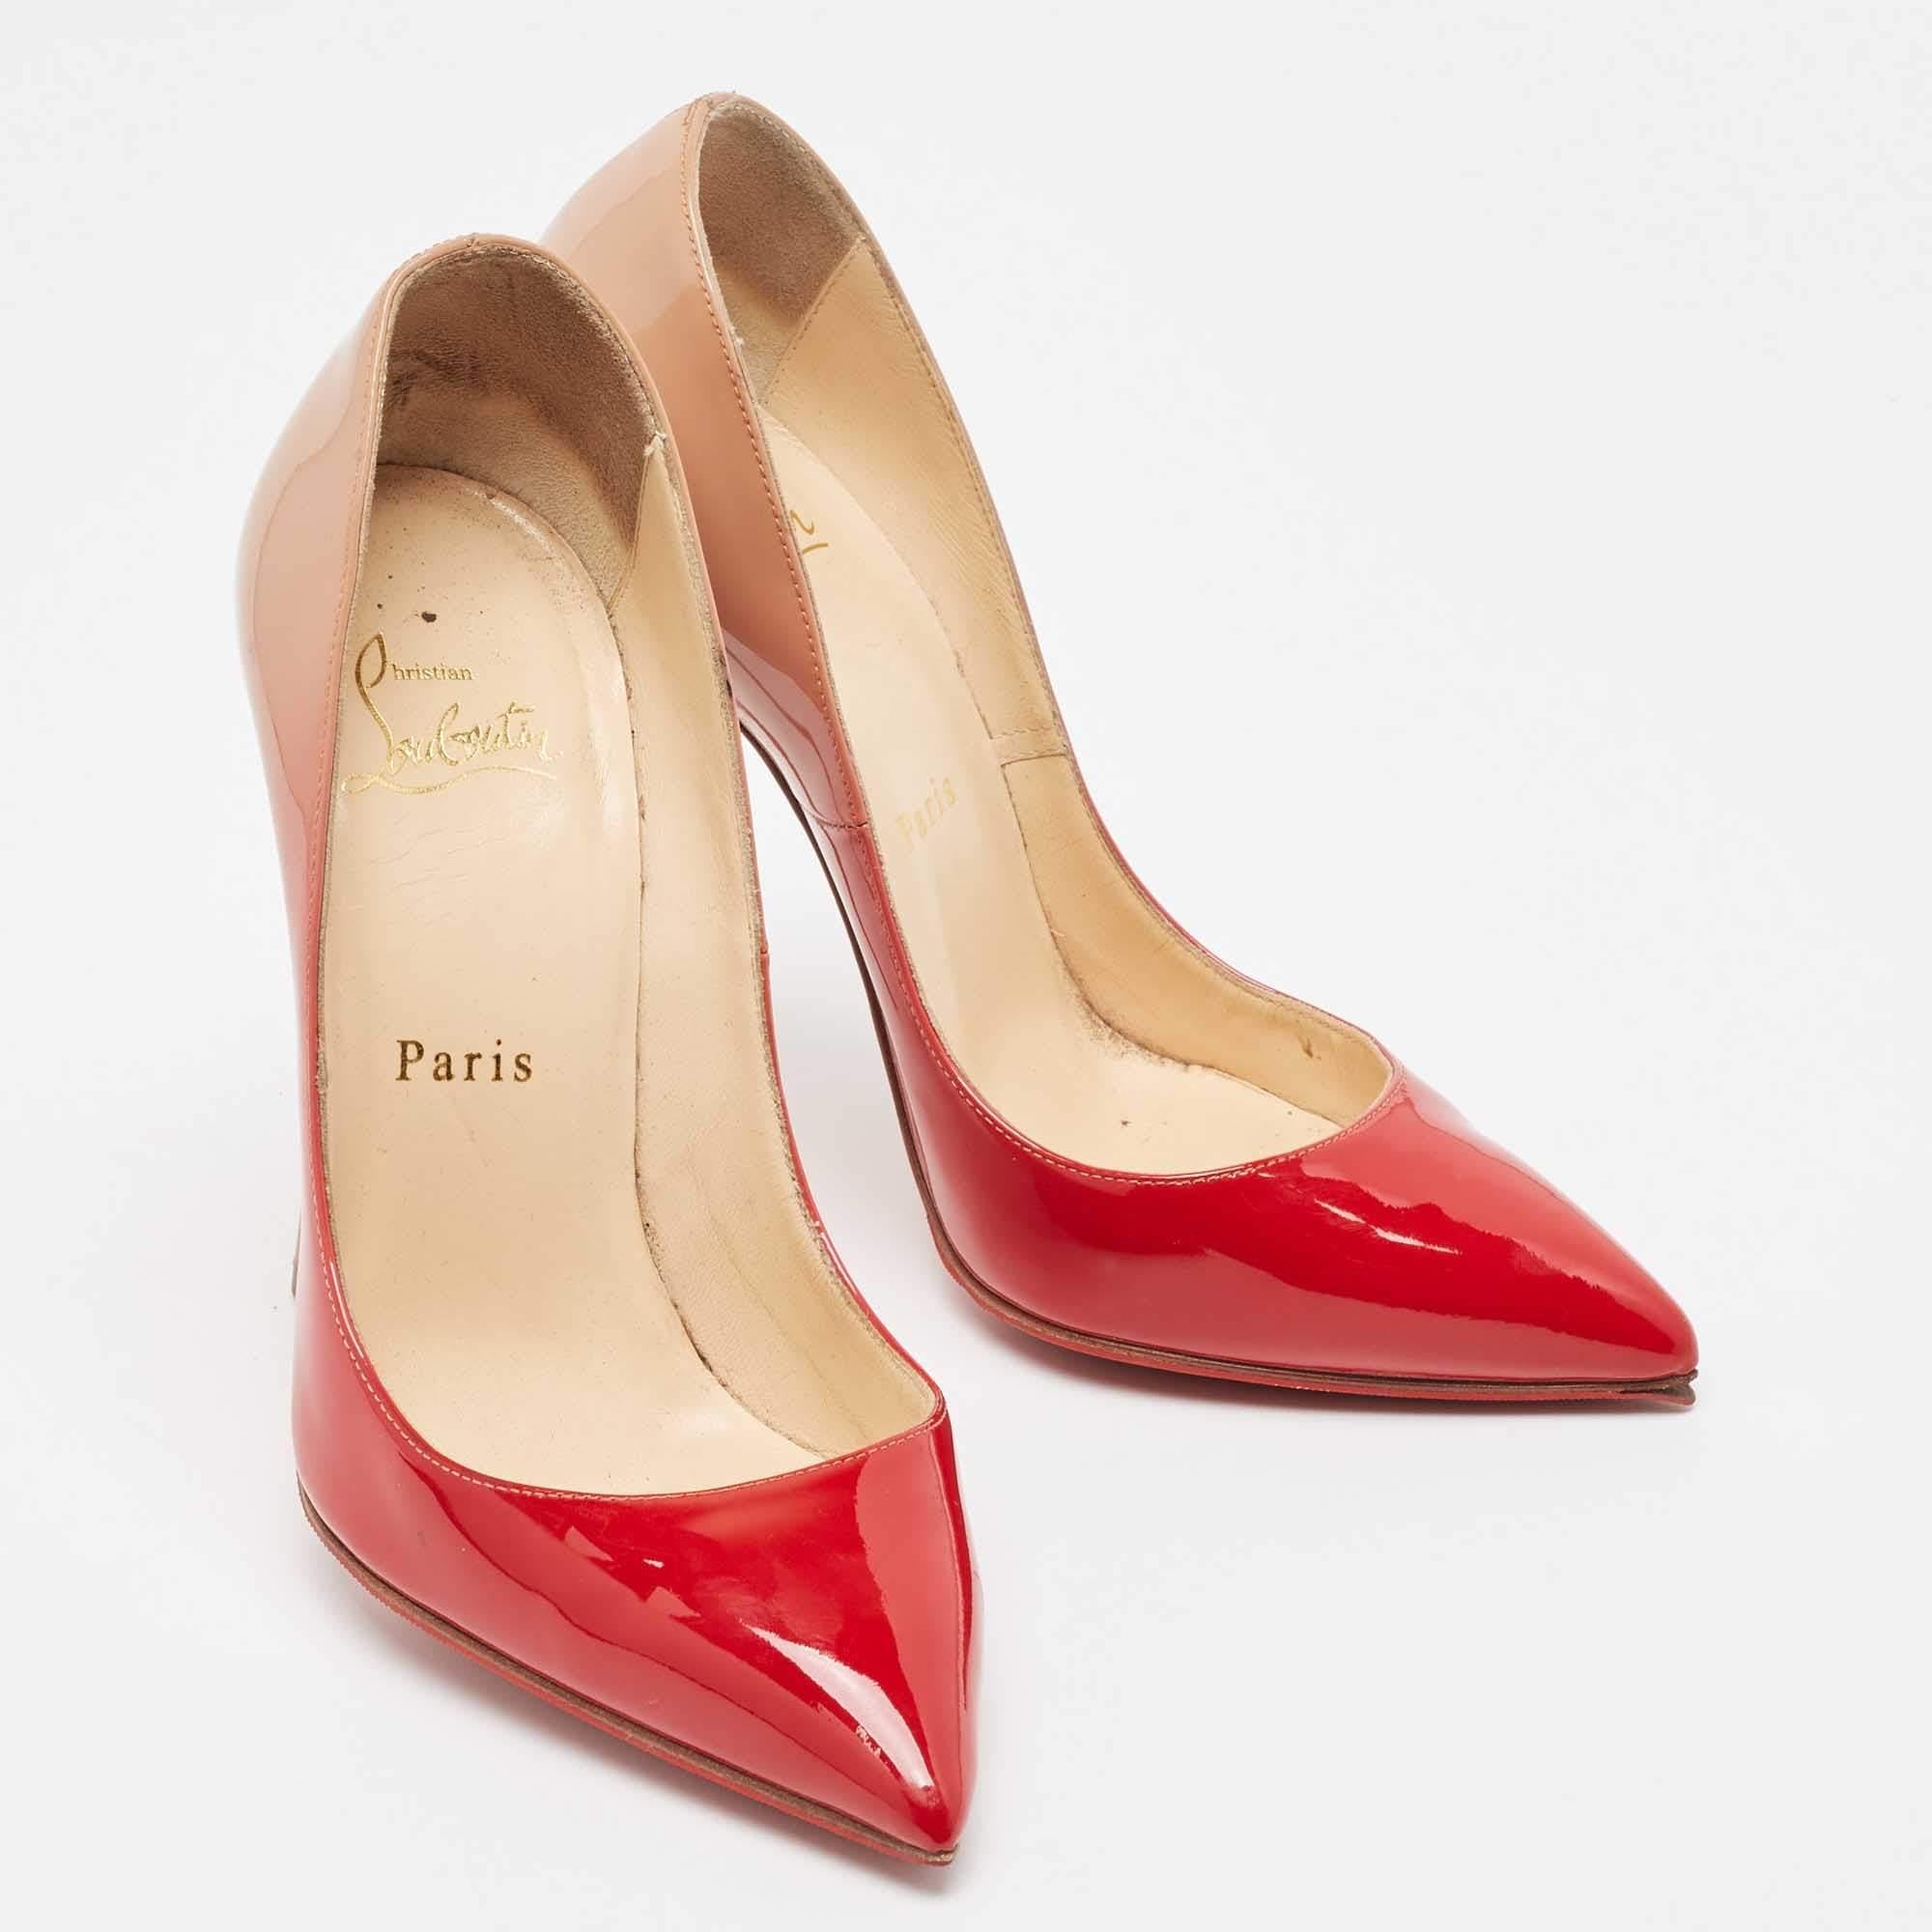 Women's Christian Louboutin Red/Beige Ombre Patent Leather So Kate Pumps Size 36